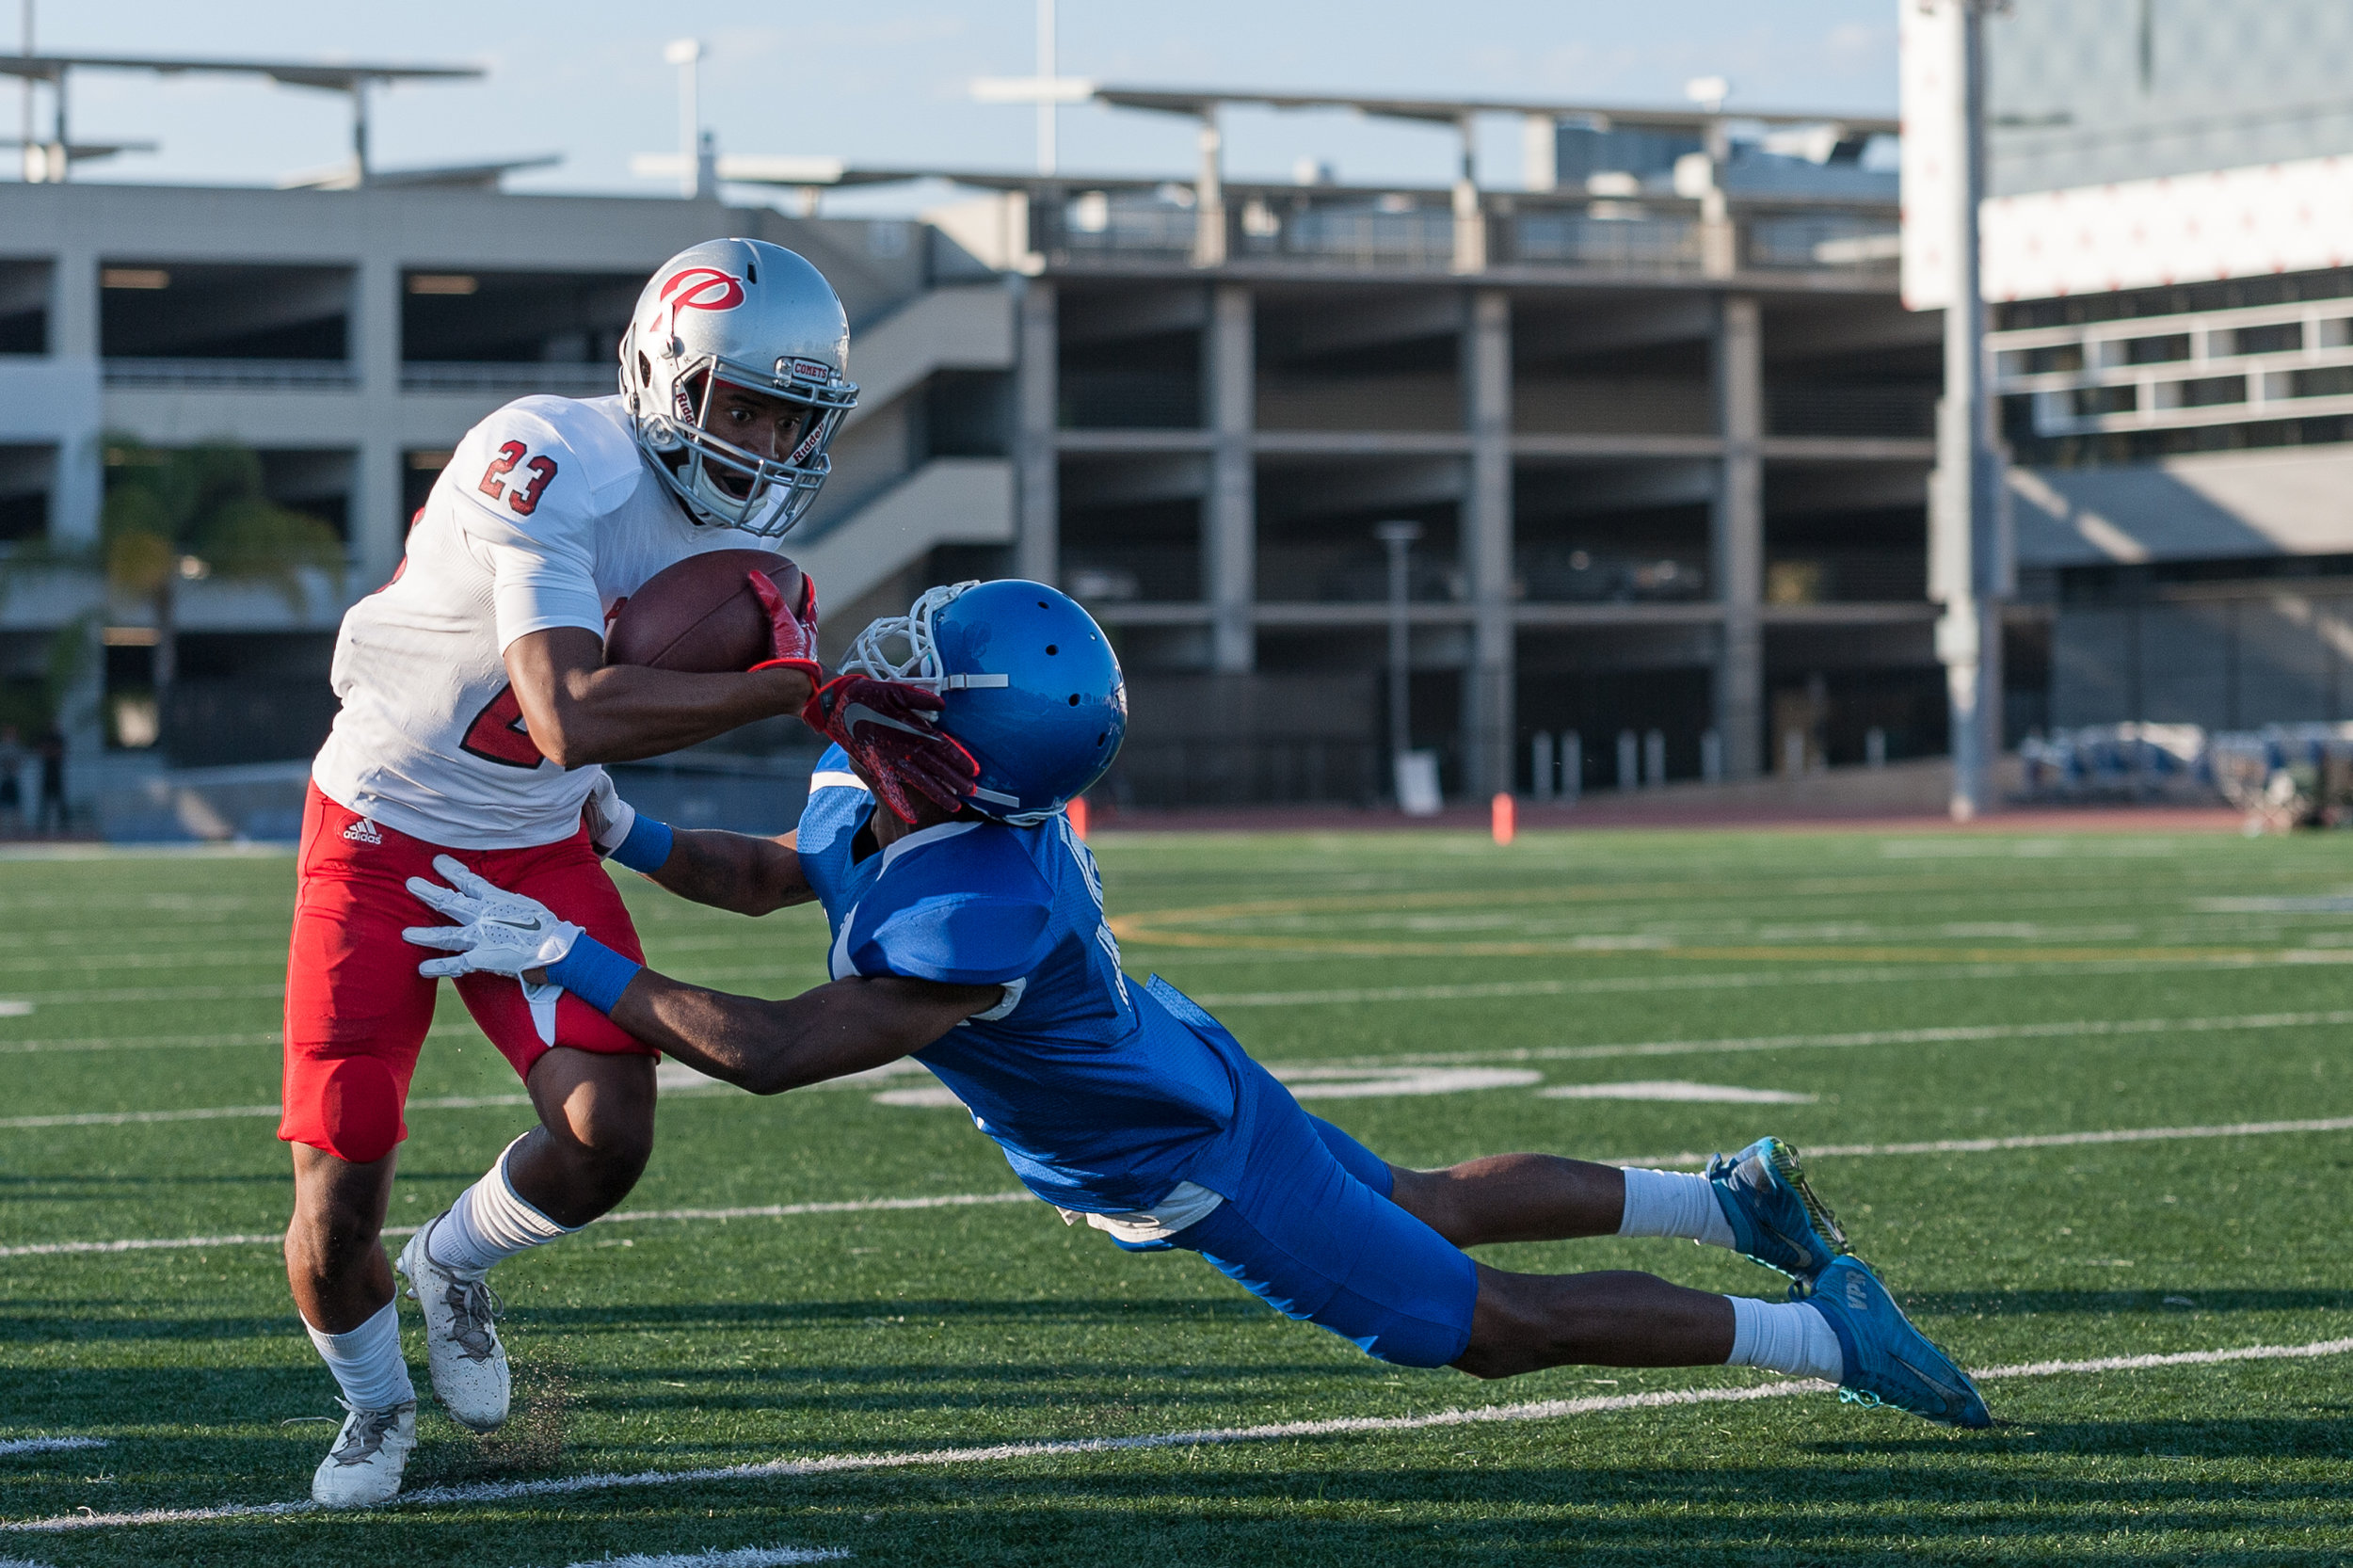  Defensive back Tyree Fryer (6) of the Santa Monica College Corsairs forces Palomar College wide receiver Rashad Harper (23) out of bounds to end the play. The Santa Monica College Corsairs lost the game against the Palomar College Comets 14-45. The 